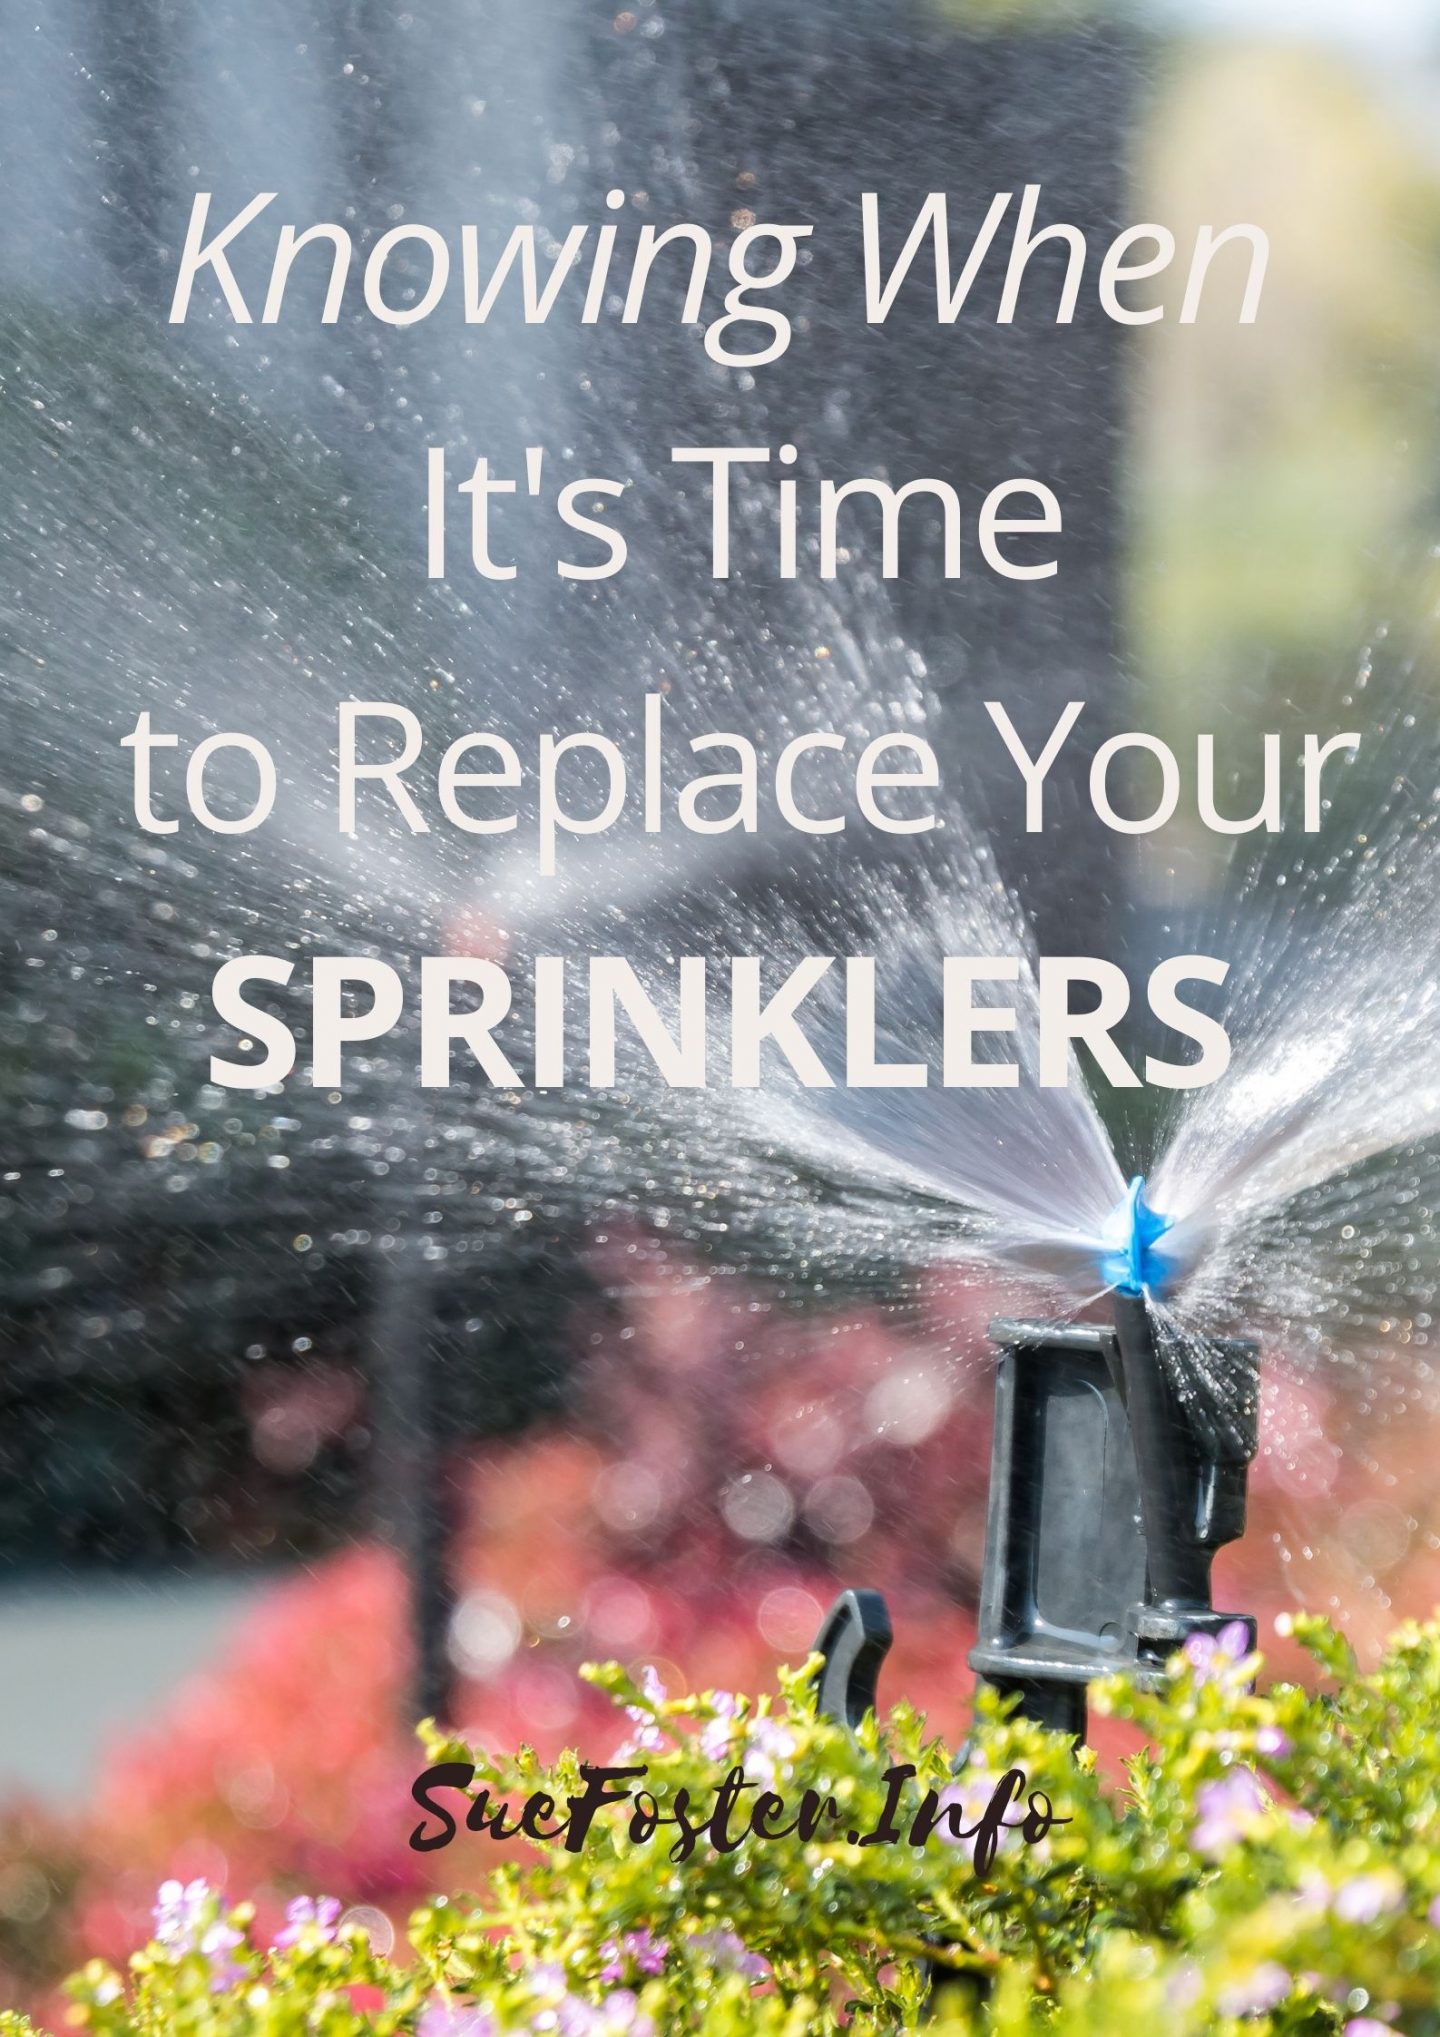 If you want to take care of your lawn properly, you need to make sure that the sprinklers are in good shape. Here are some signs to watch out for.